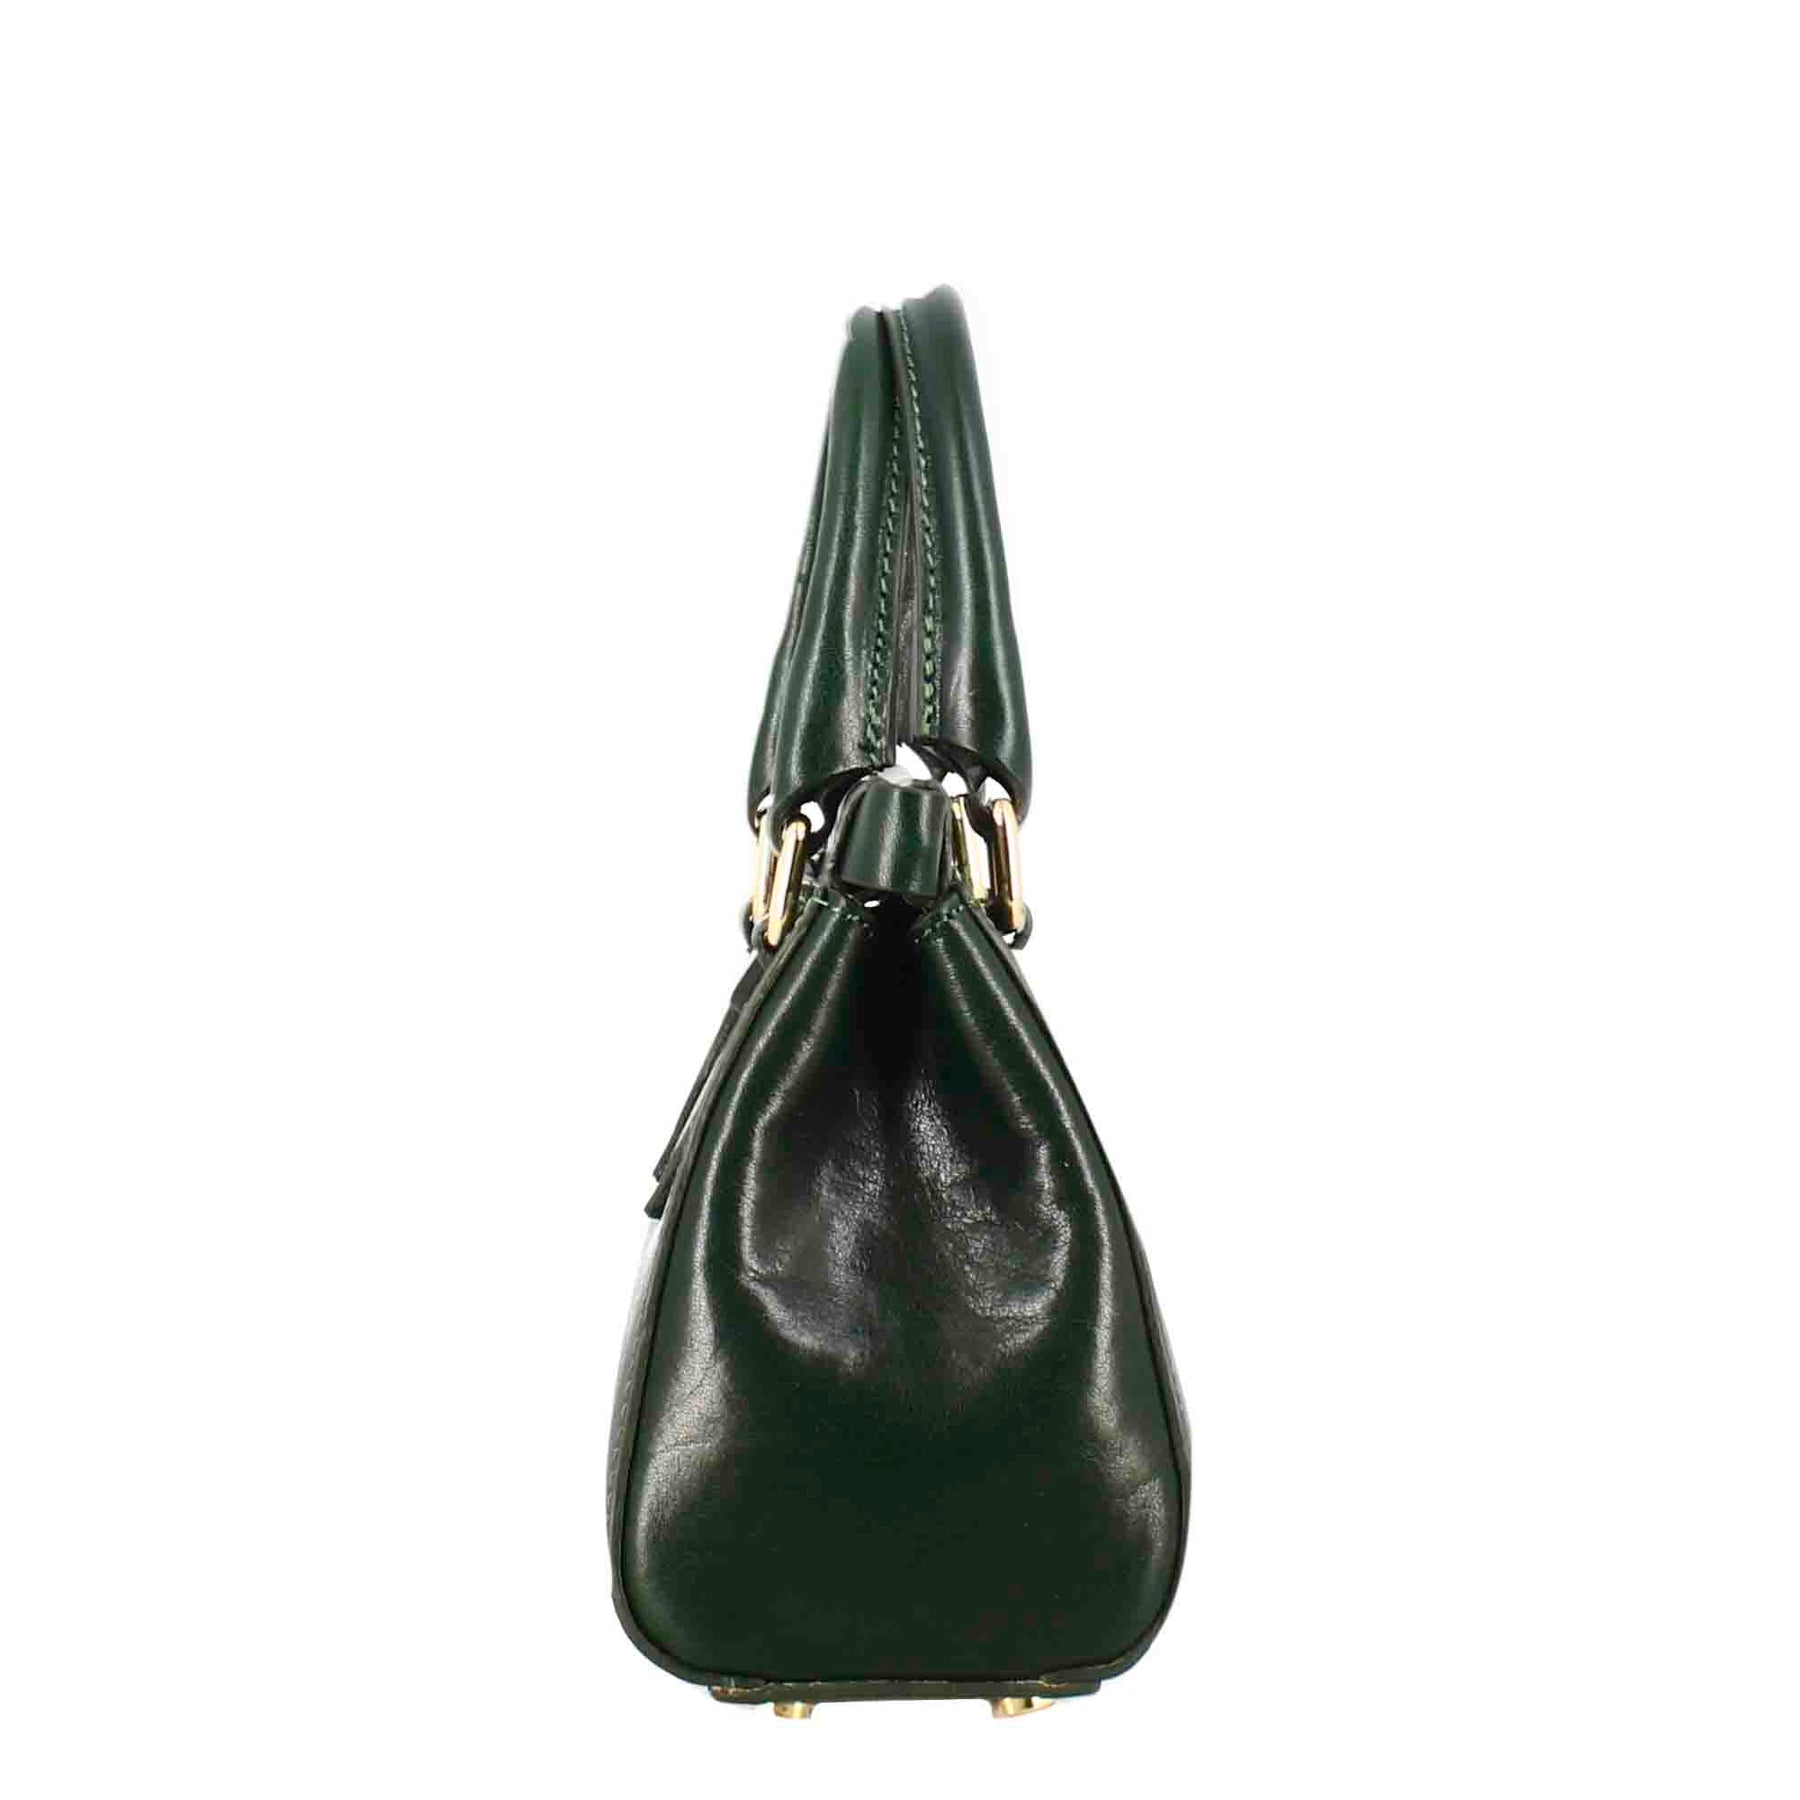 Fiorenza leather handbag with removable green shoulder strap